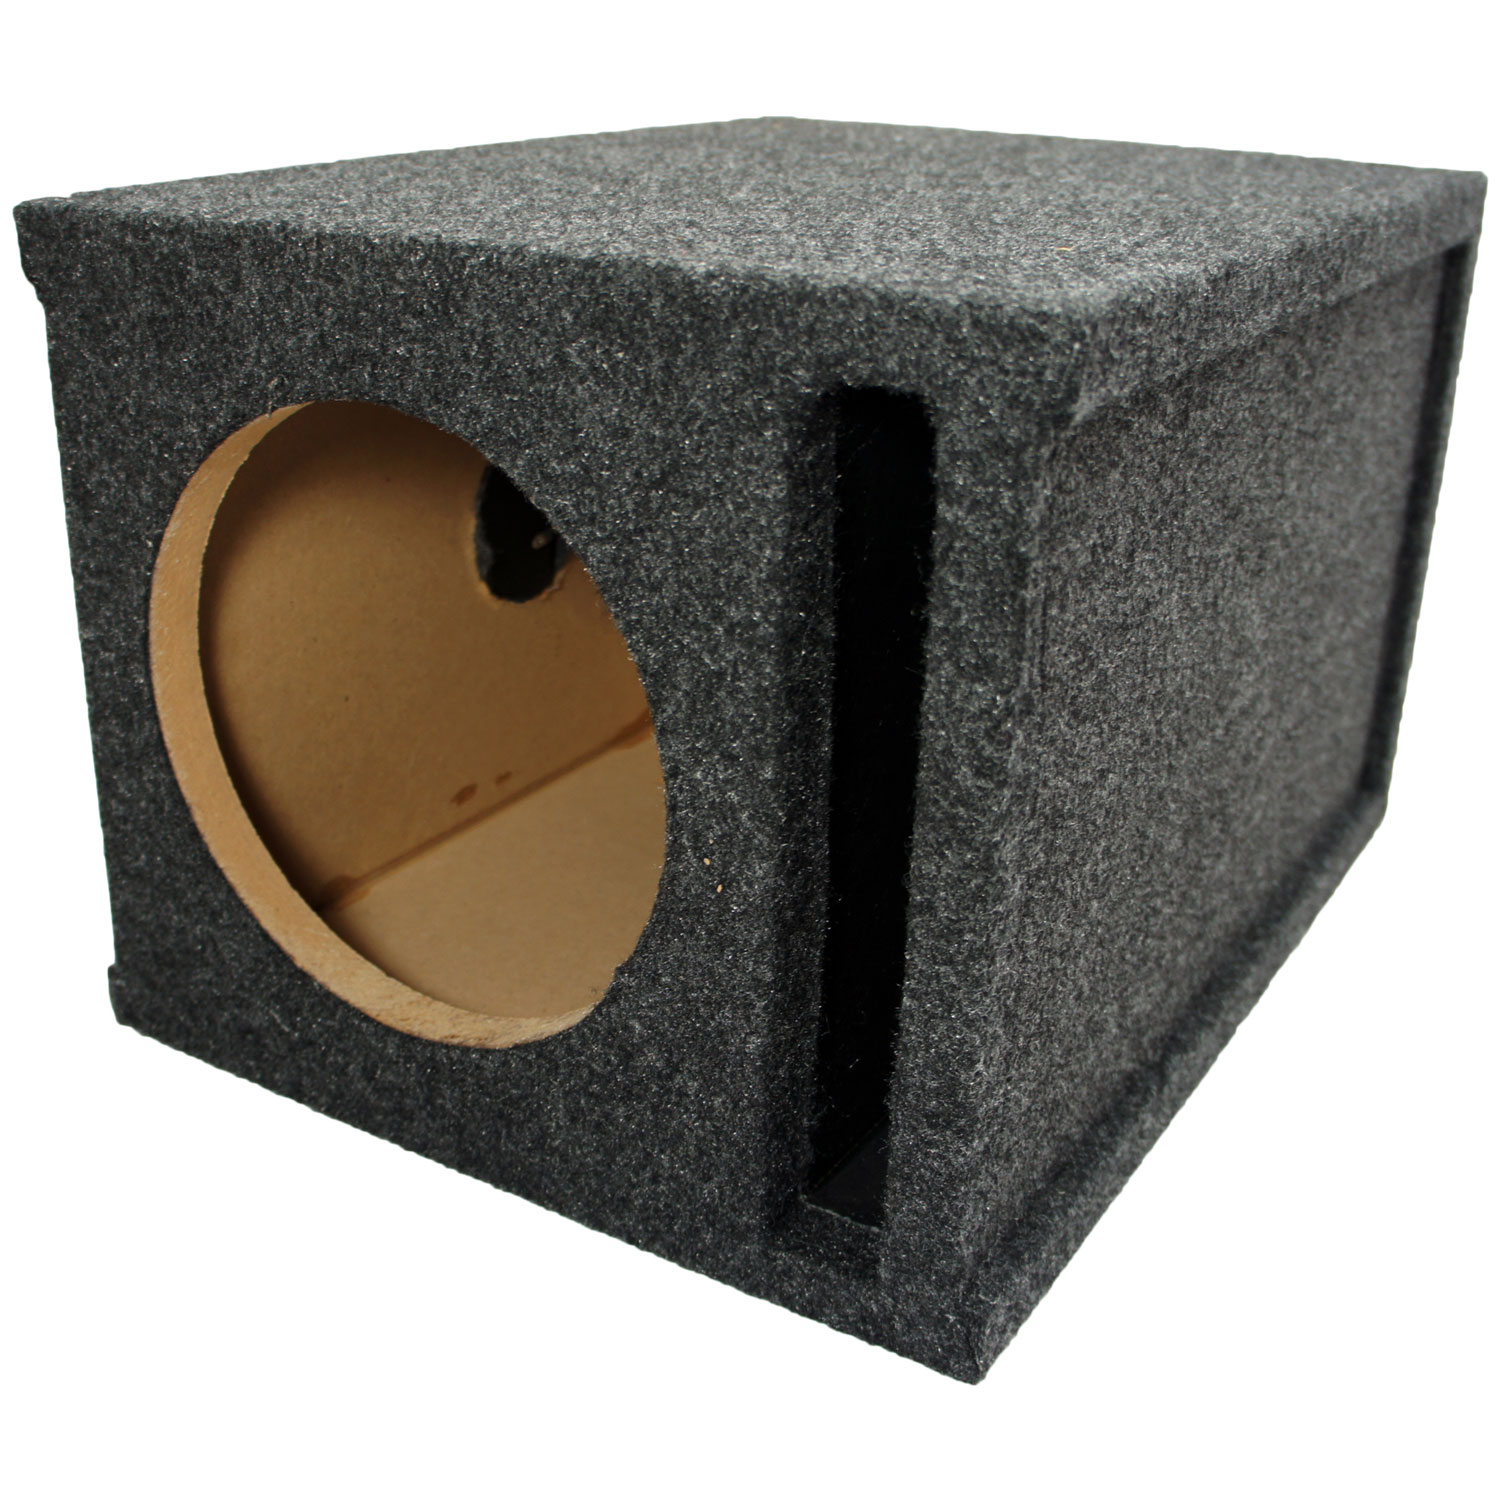 8" Ported Subwoofer Box Enclosure (Gray) - 1X8VMBASS